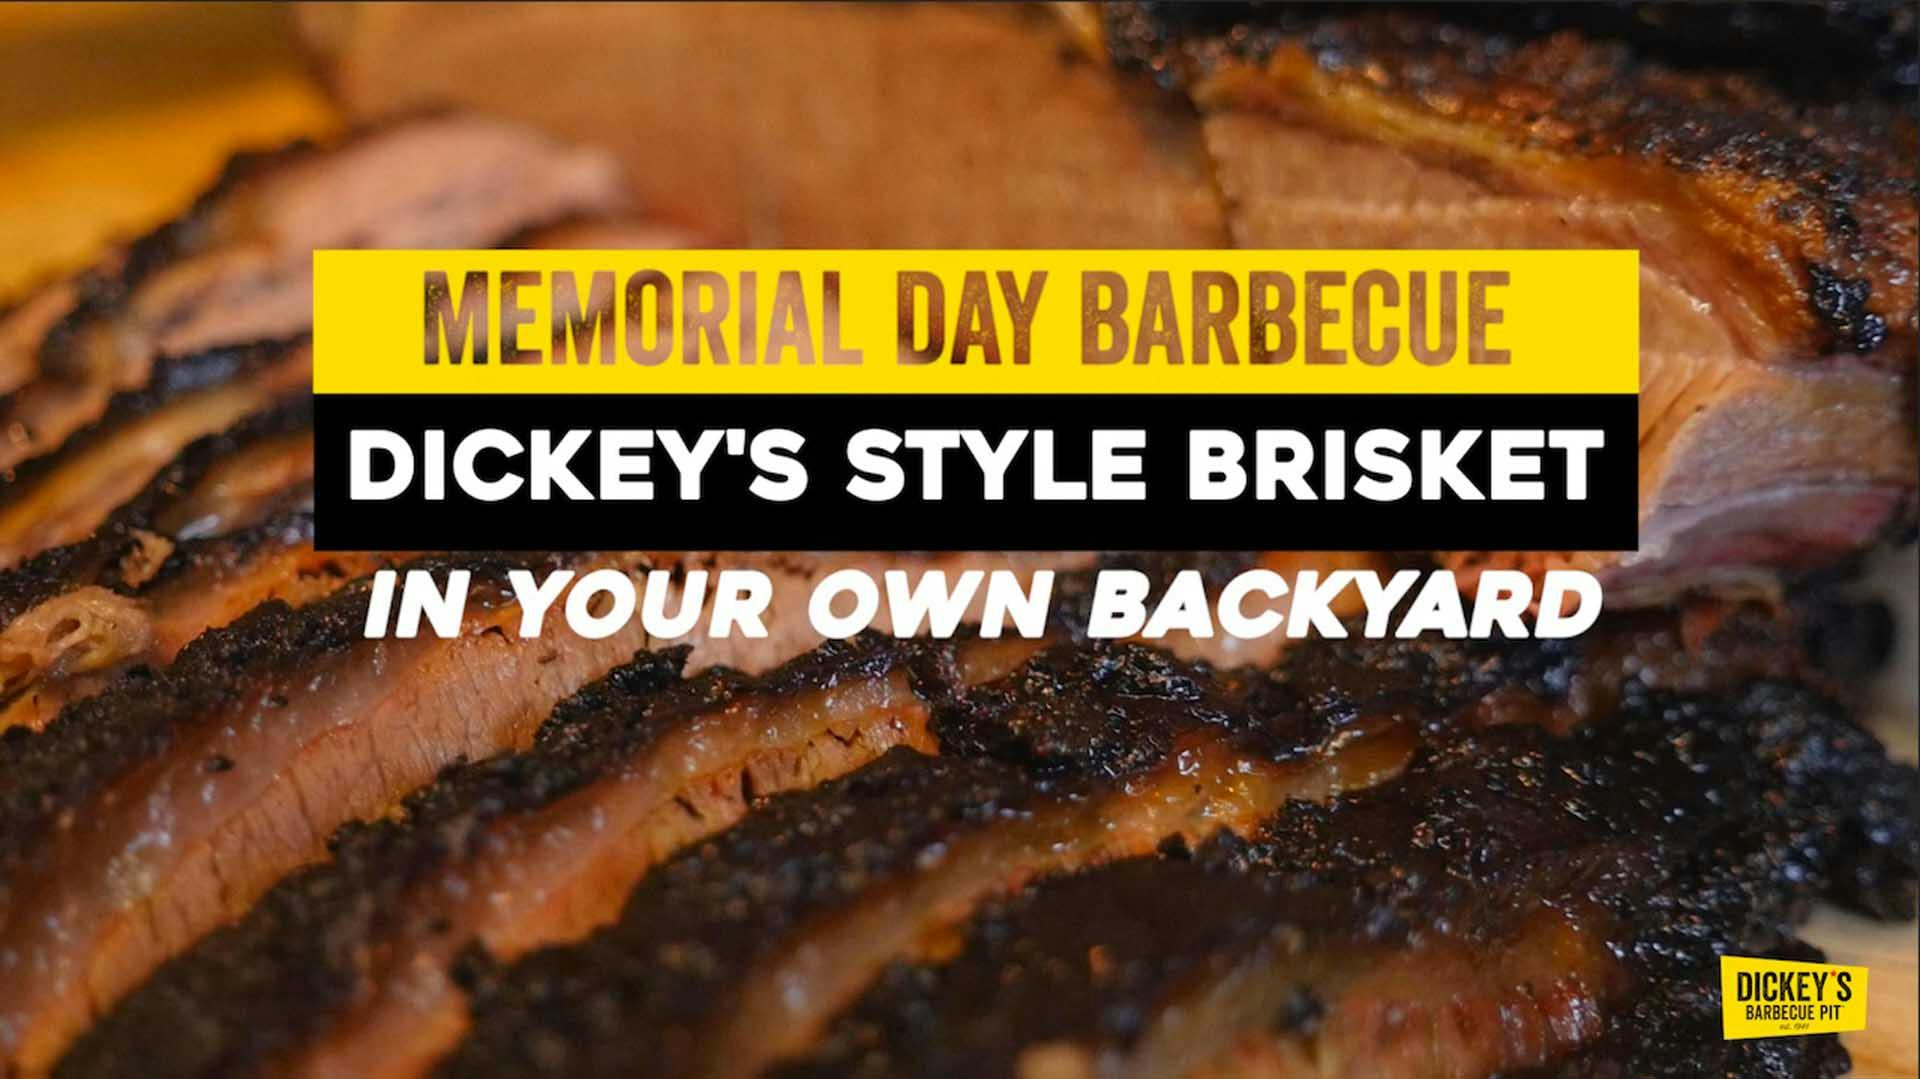 Memorial Day Weekend Barbecue Tips - Our Brisket Recipe Secrets!